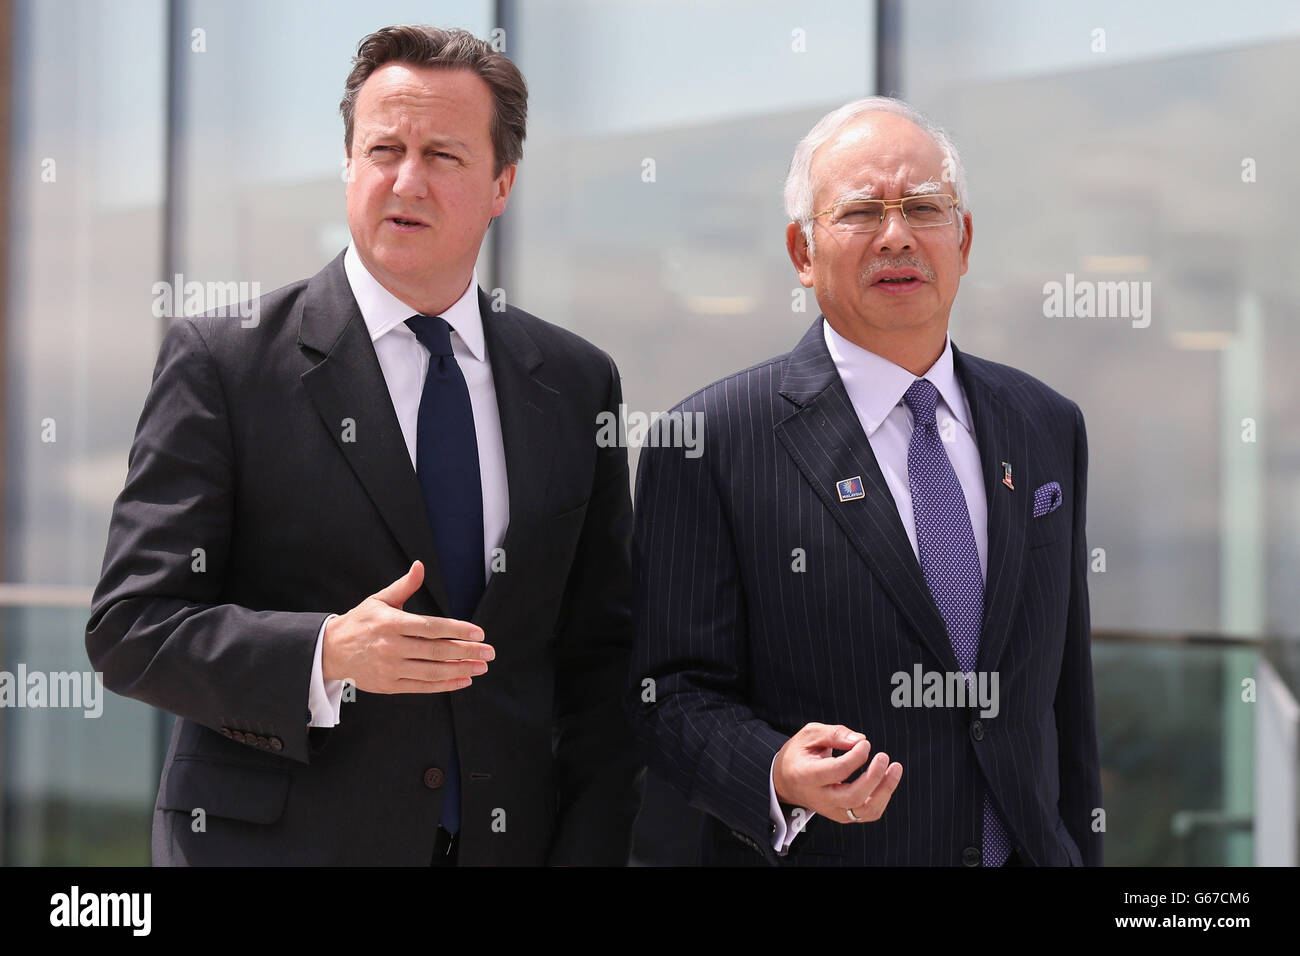 Prime Minister David Cameron holds a bilateral meeting with Najib Razak (right), the Prime Minister of Malaysia, at Battersea Power Station in London. Cameron said it was 'about time' as he hailed the start of an &Acirc;&pound;8 billion redevelopment of Battersea Power Station. Stock Photo